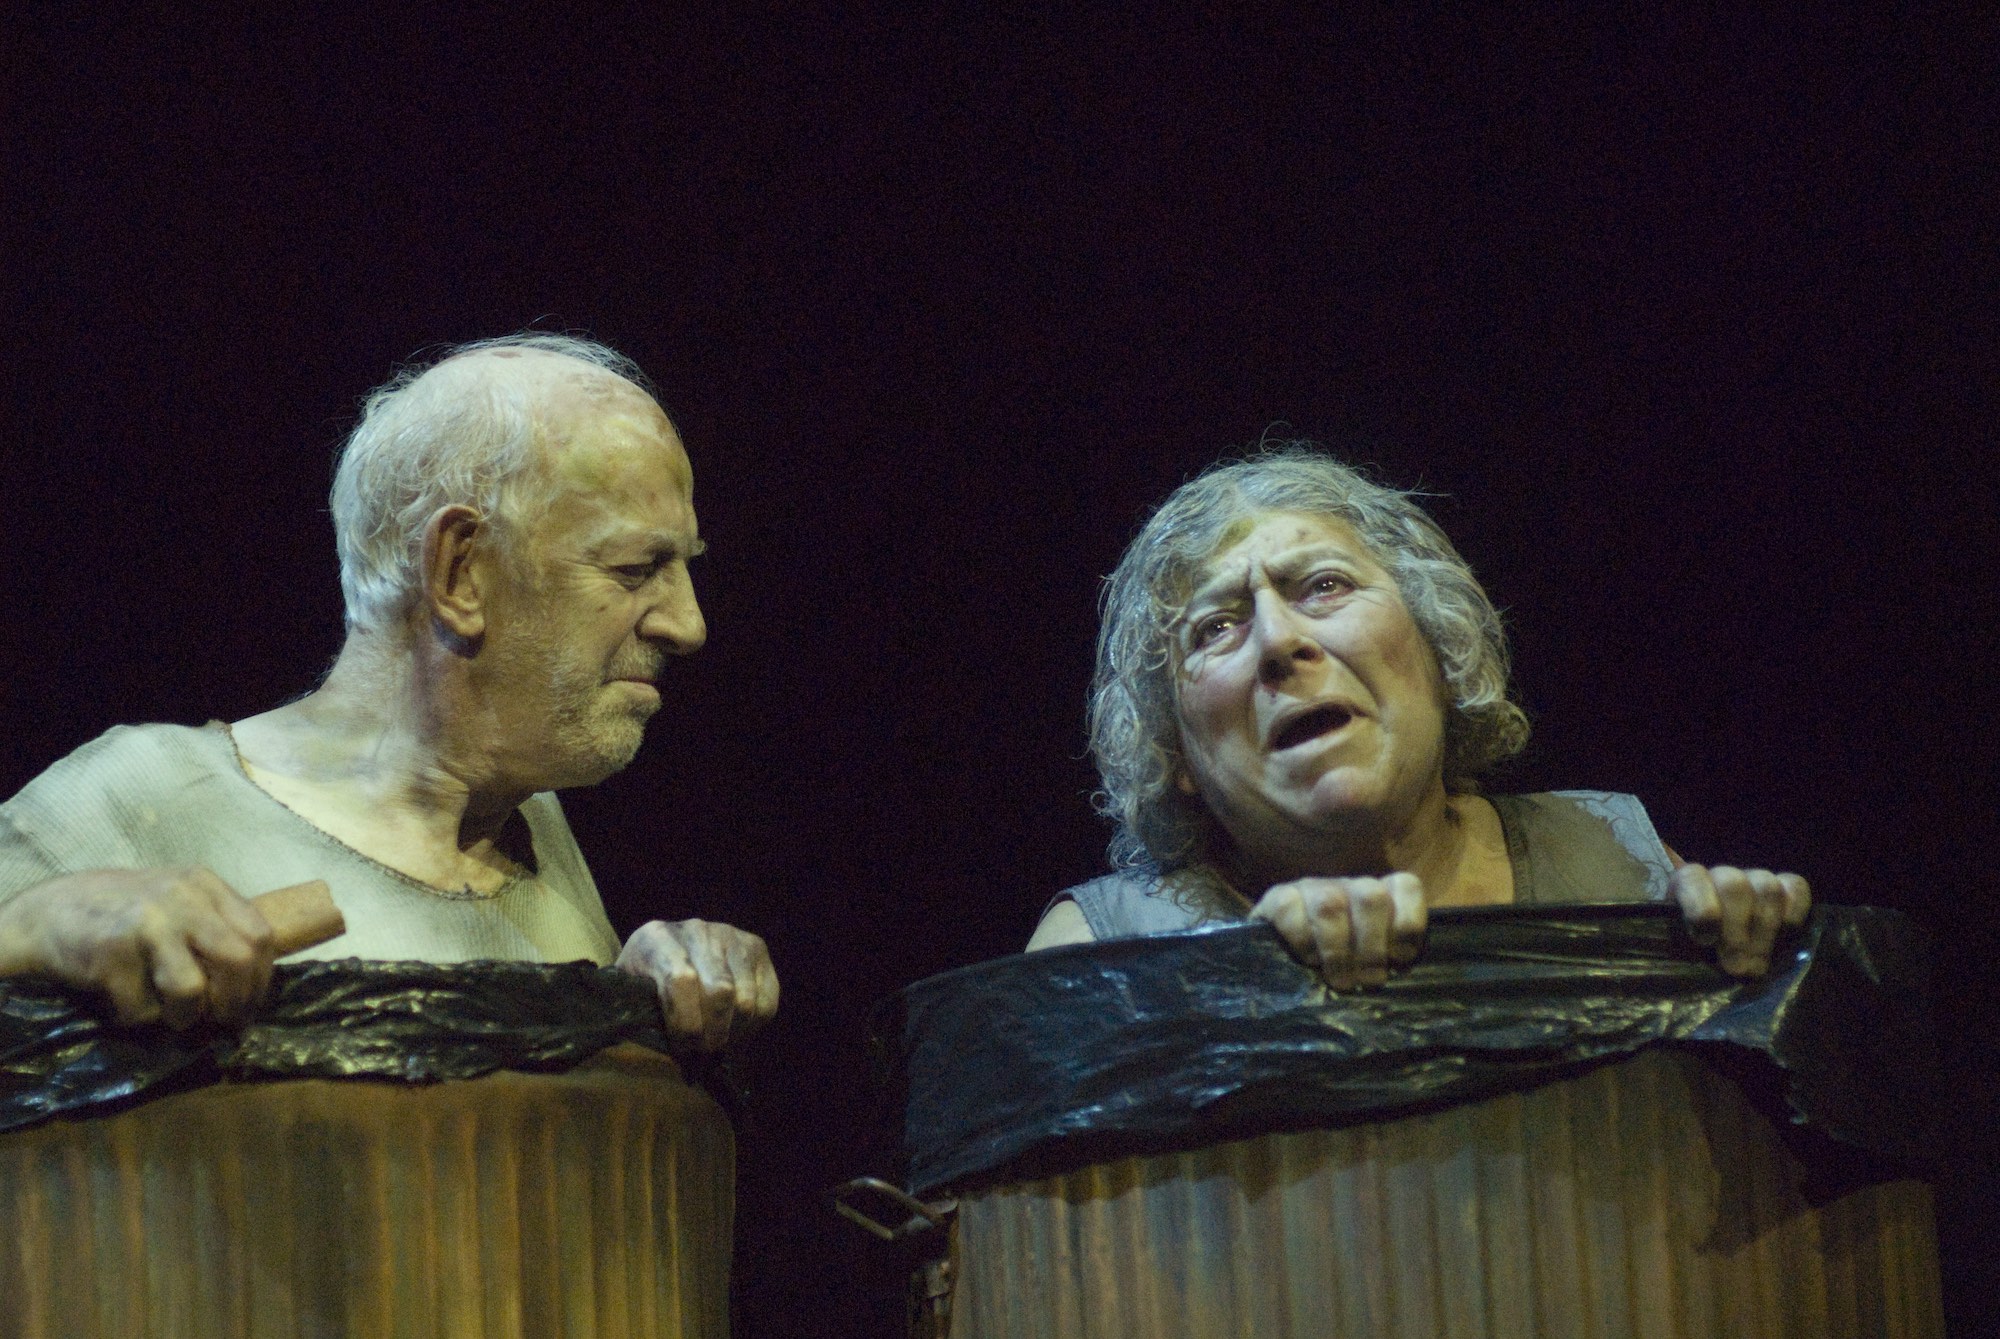 Two actors stand in metal bins with bin bags in them, lamenting their lives